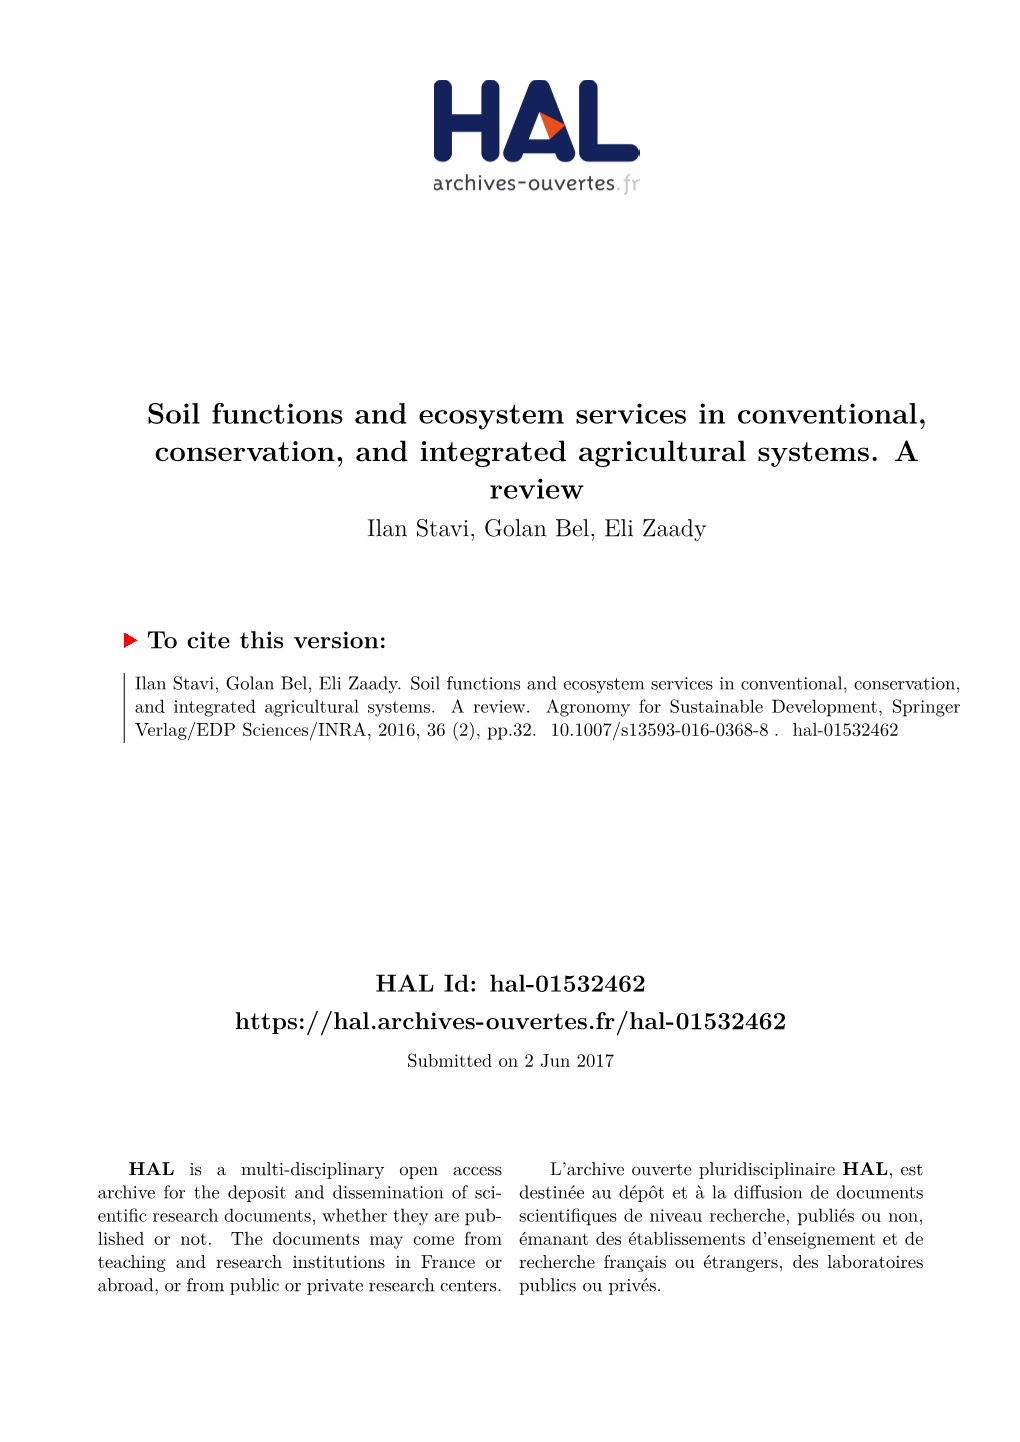 Soil Functions and Ecosystem Services in Conventional, Conservation, and Integrated Agricultural Systems